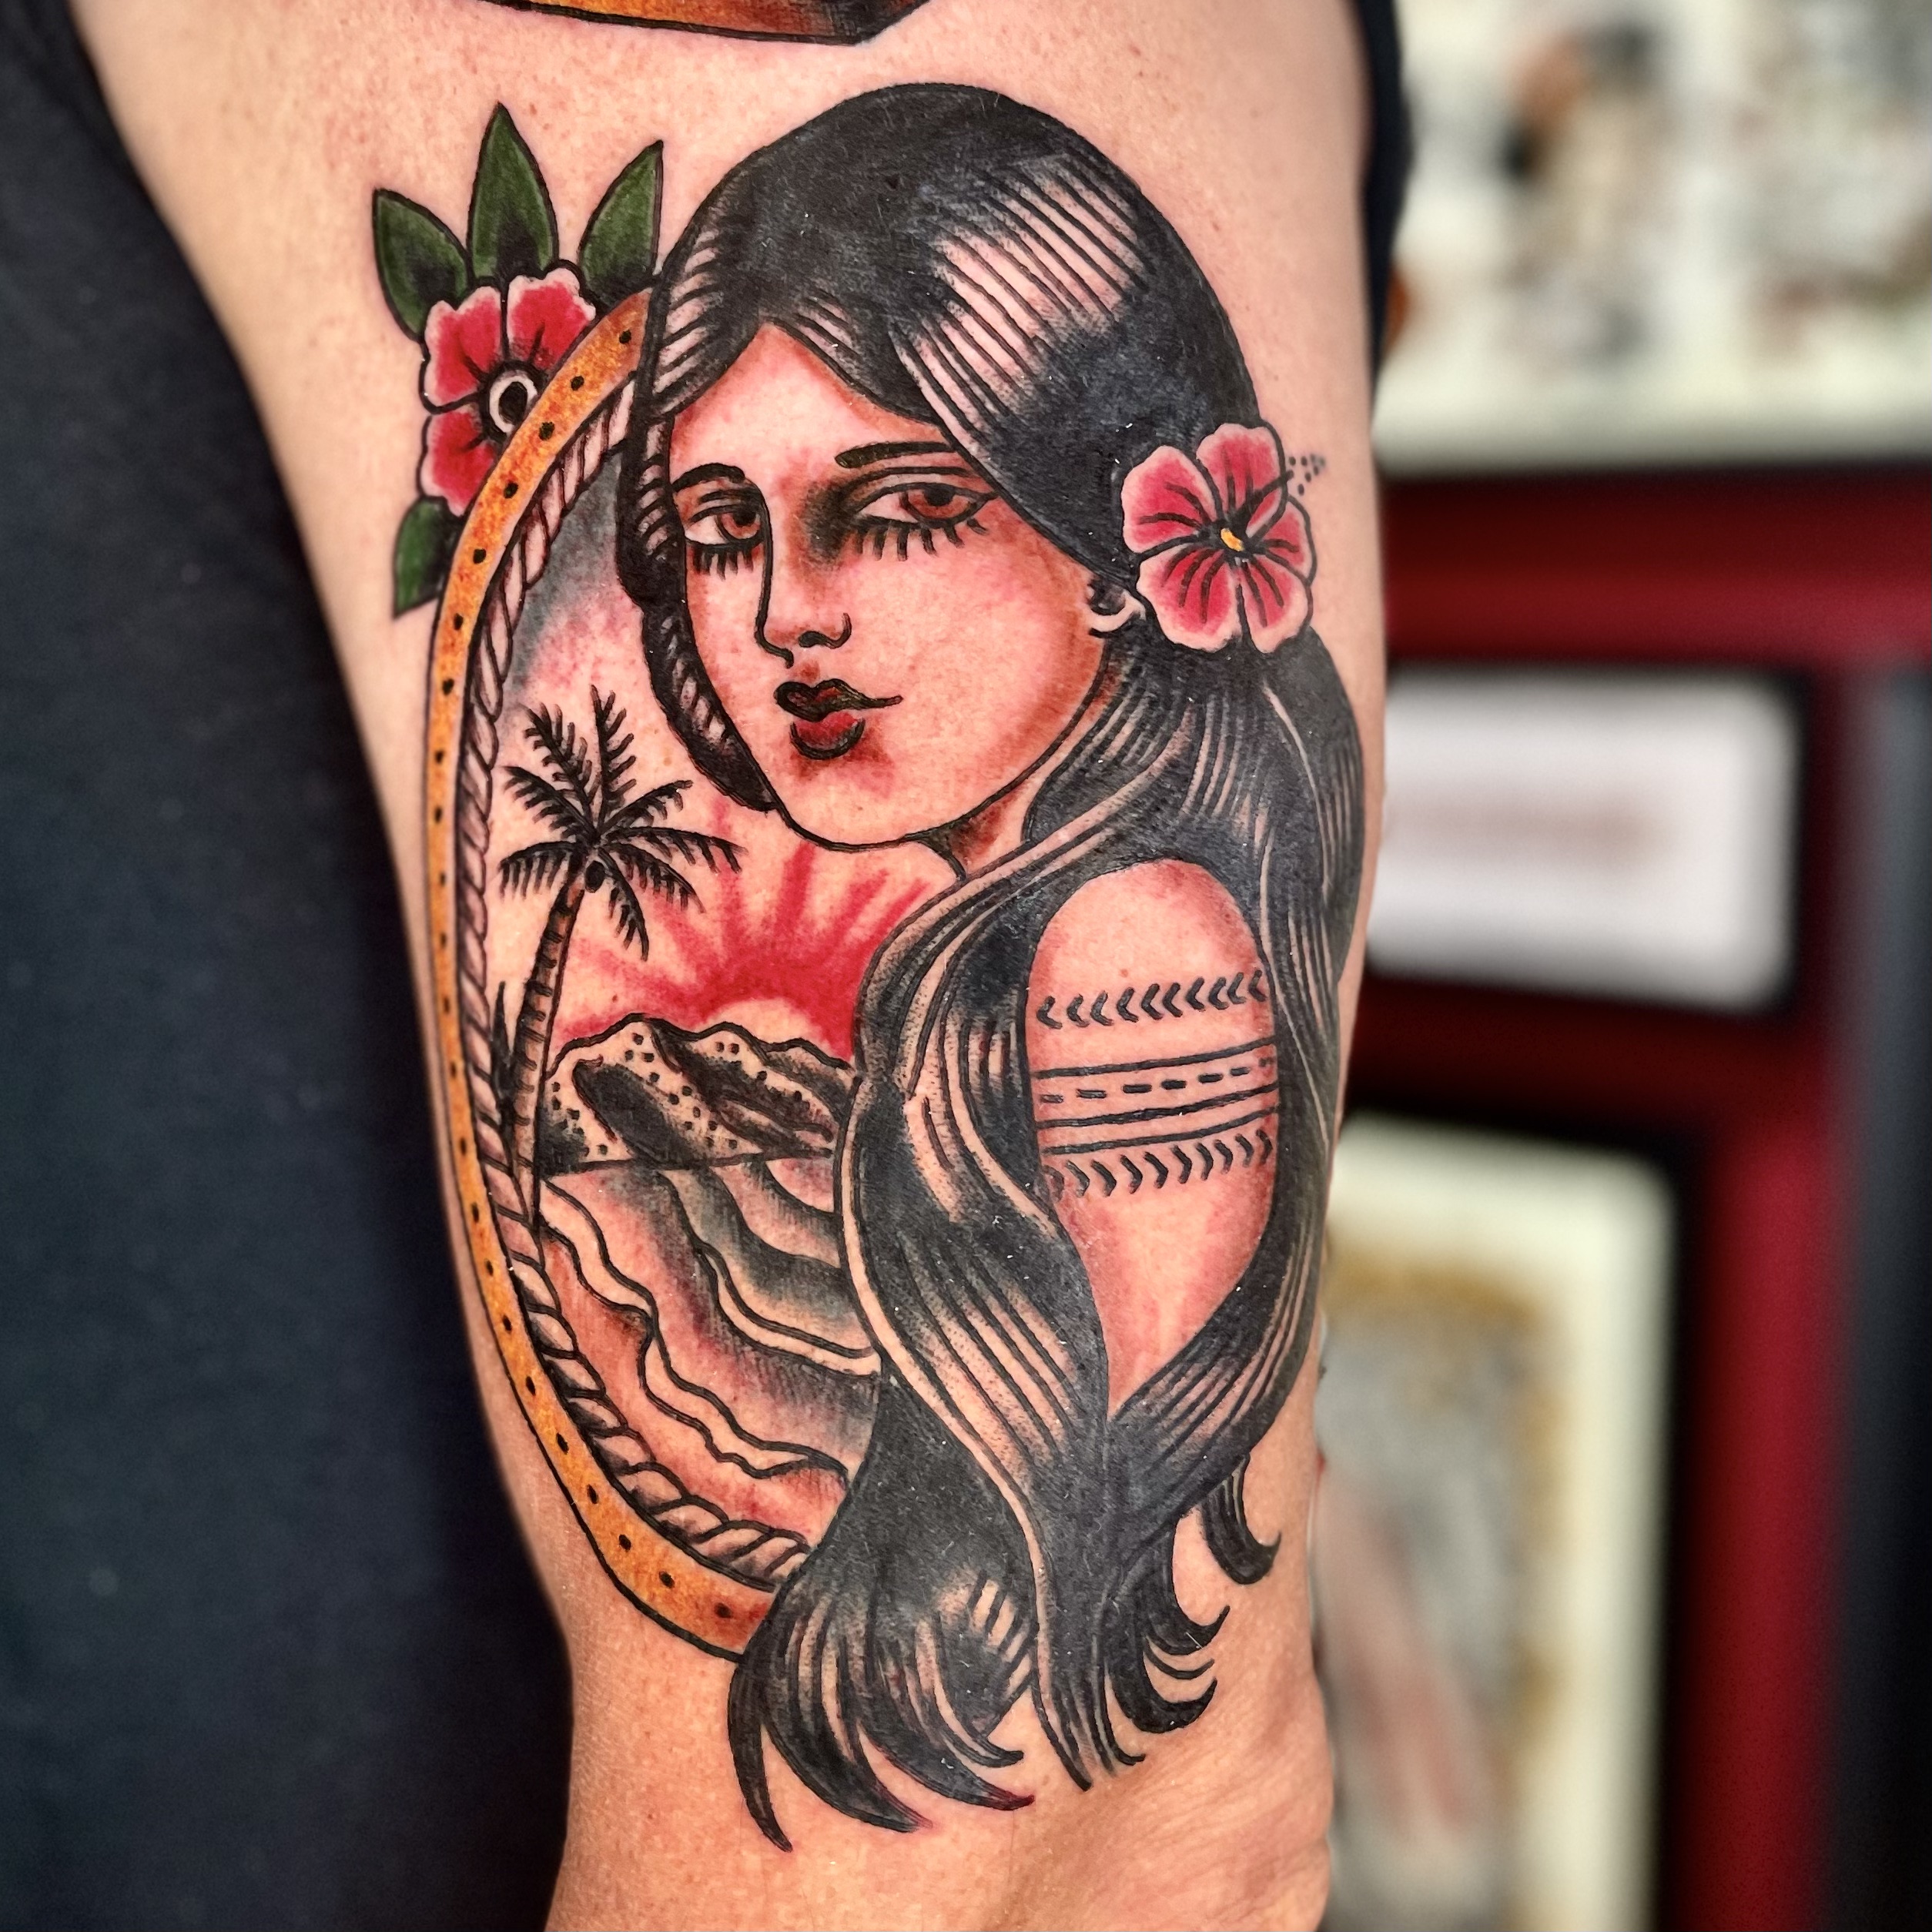 Tattoo of a woman from best tattoo shops in dallas